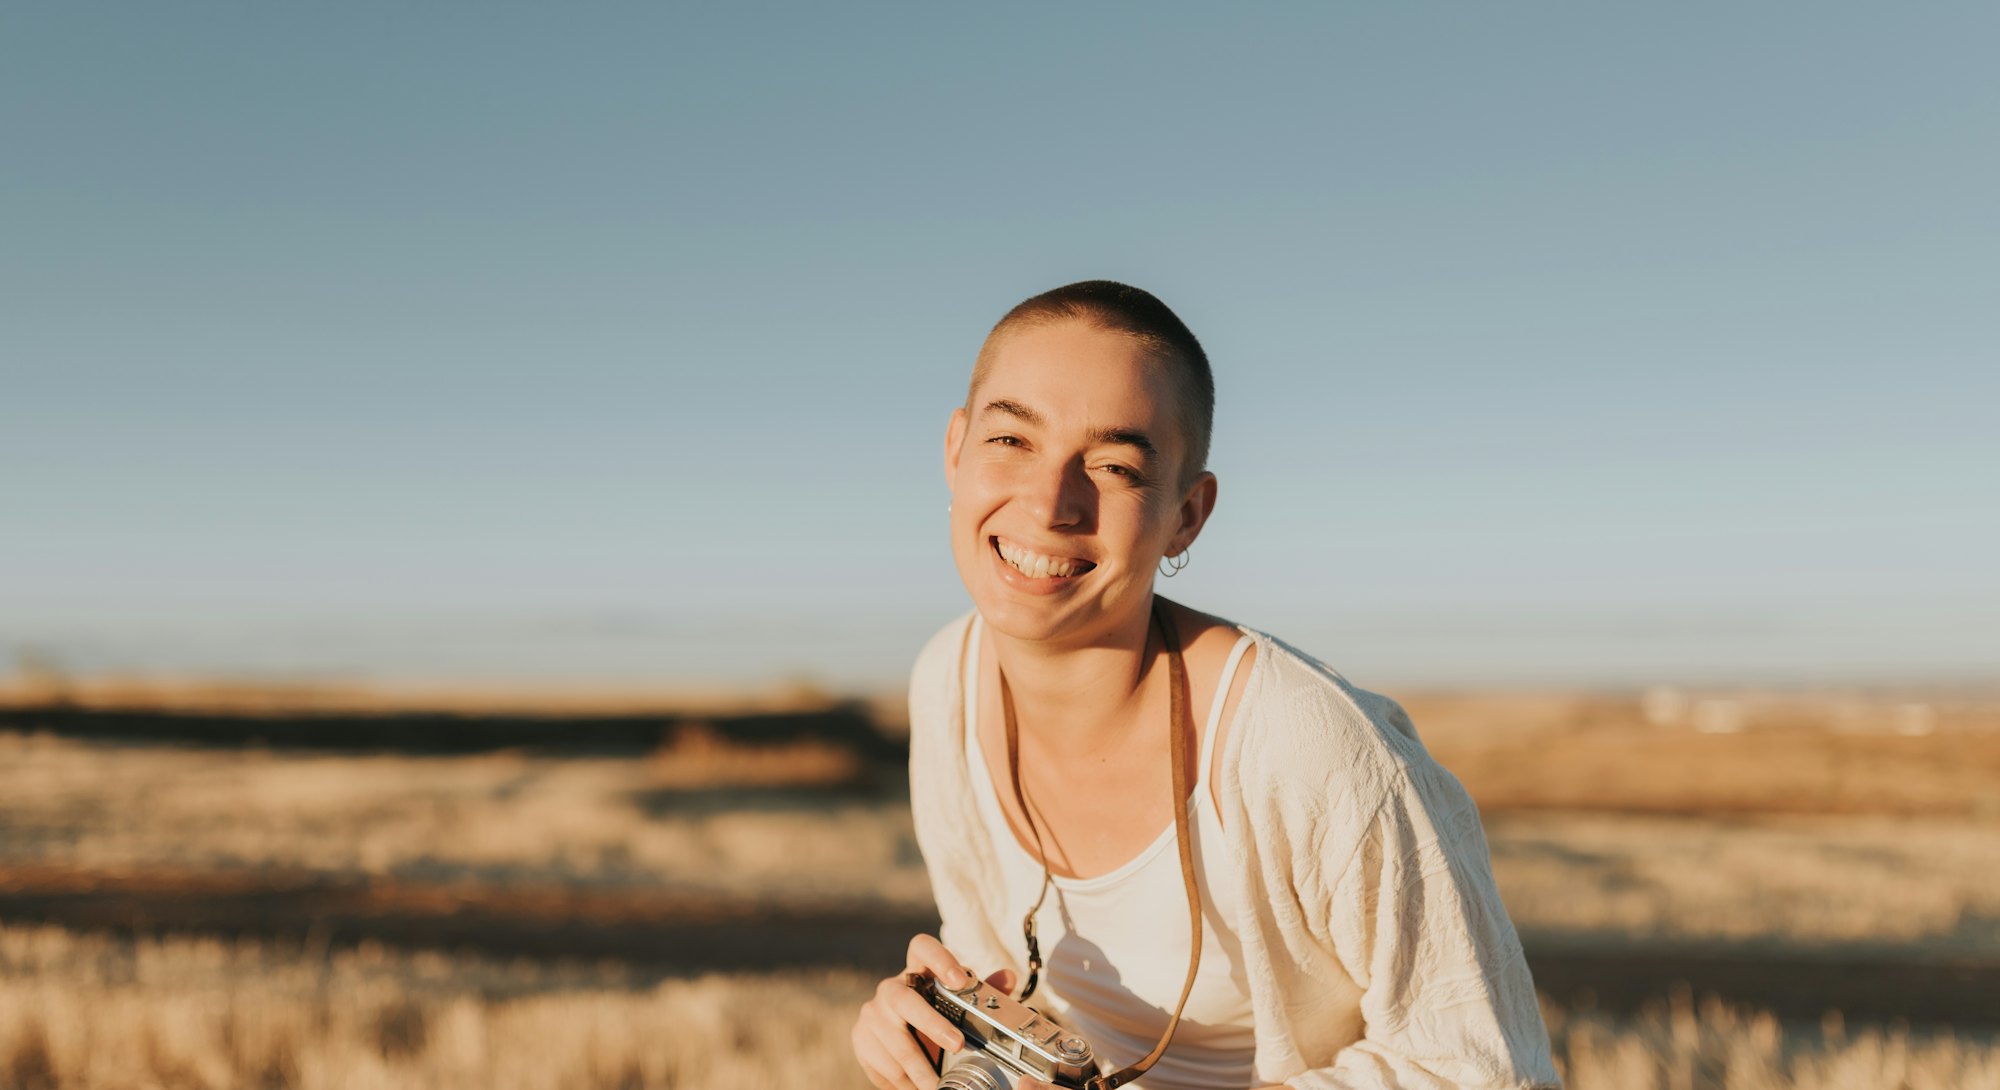 Woman with short hair looking at camera and laughing loudly holds vintage camera at sunset. She is w...